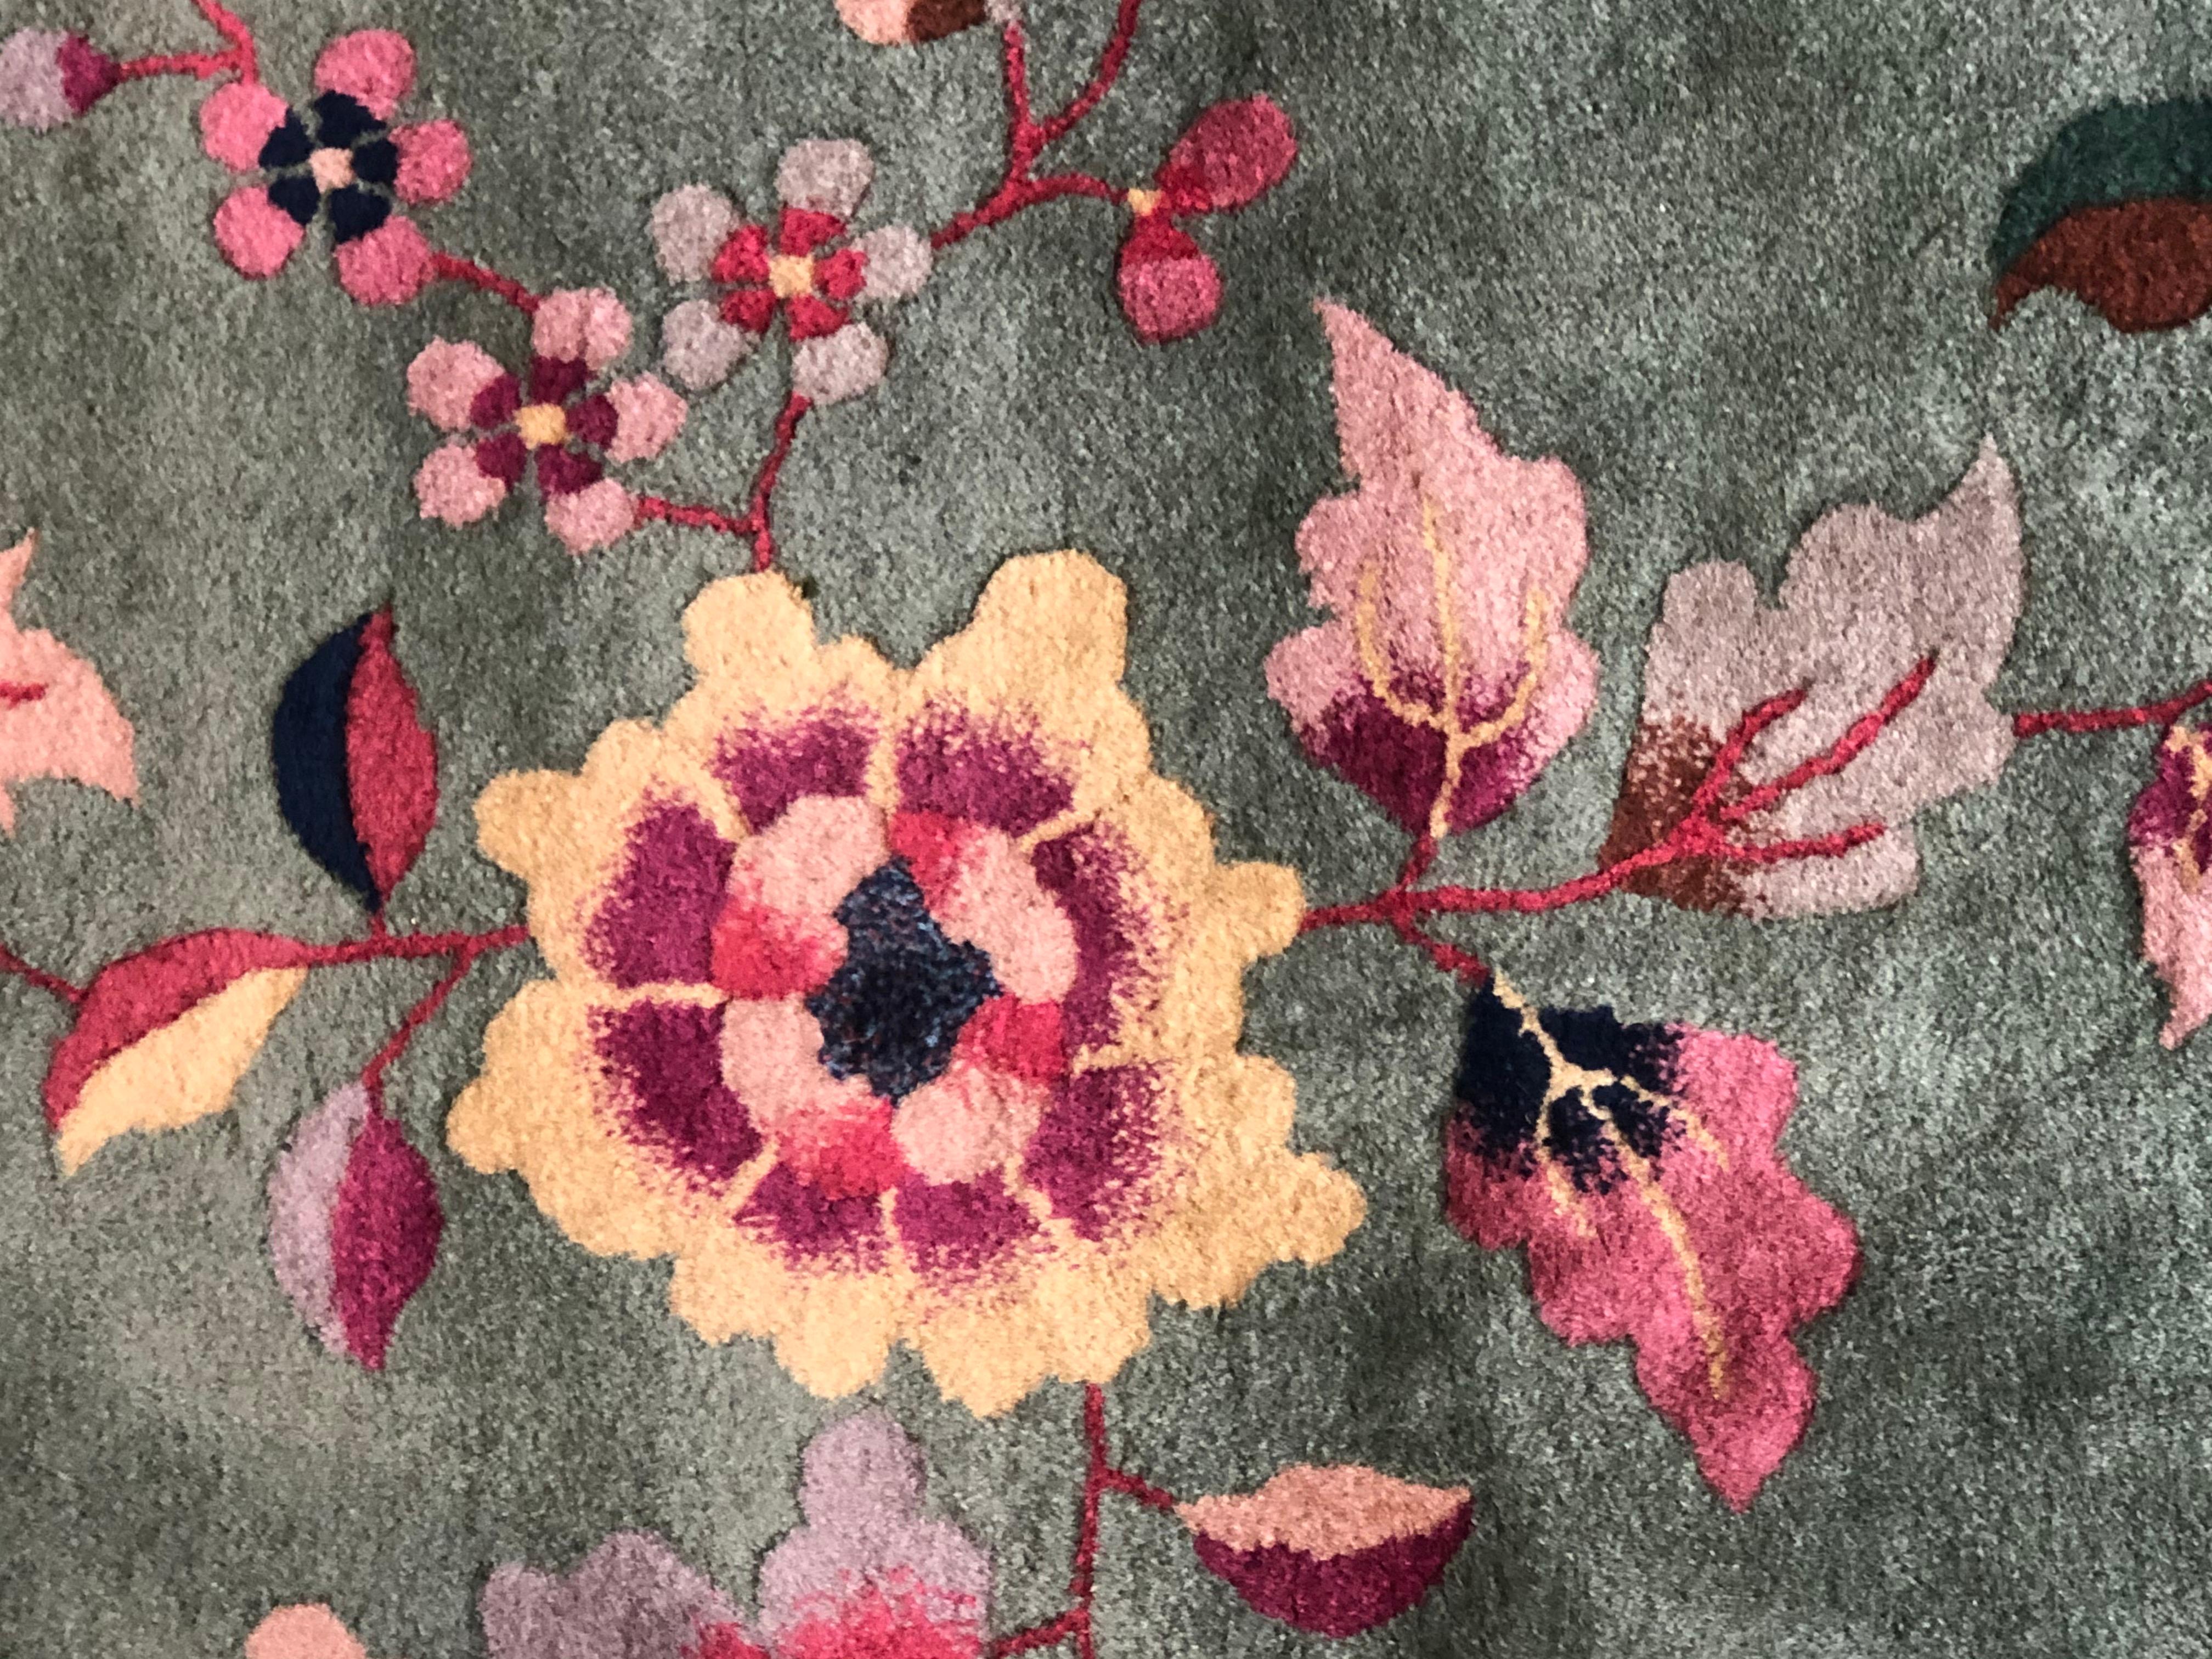 Green and Flower Art Deco Rug € 10, 000, ca 1920 2